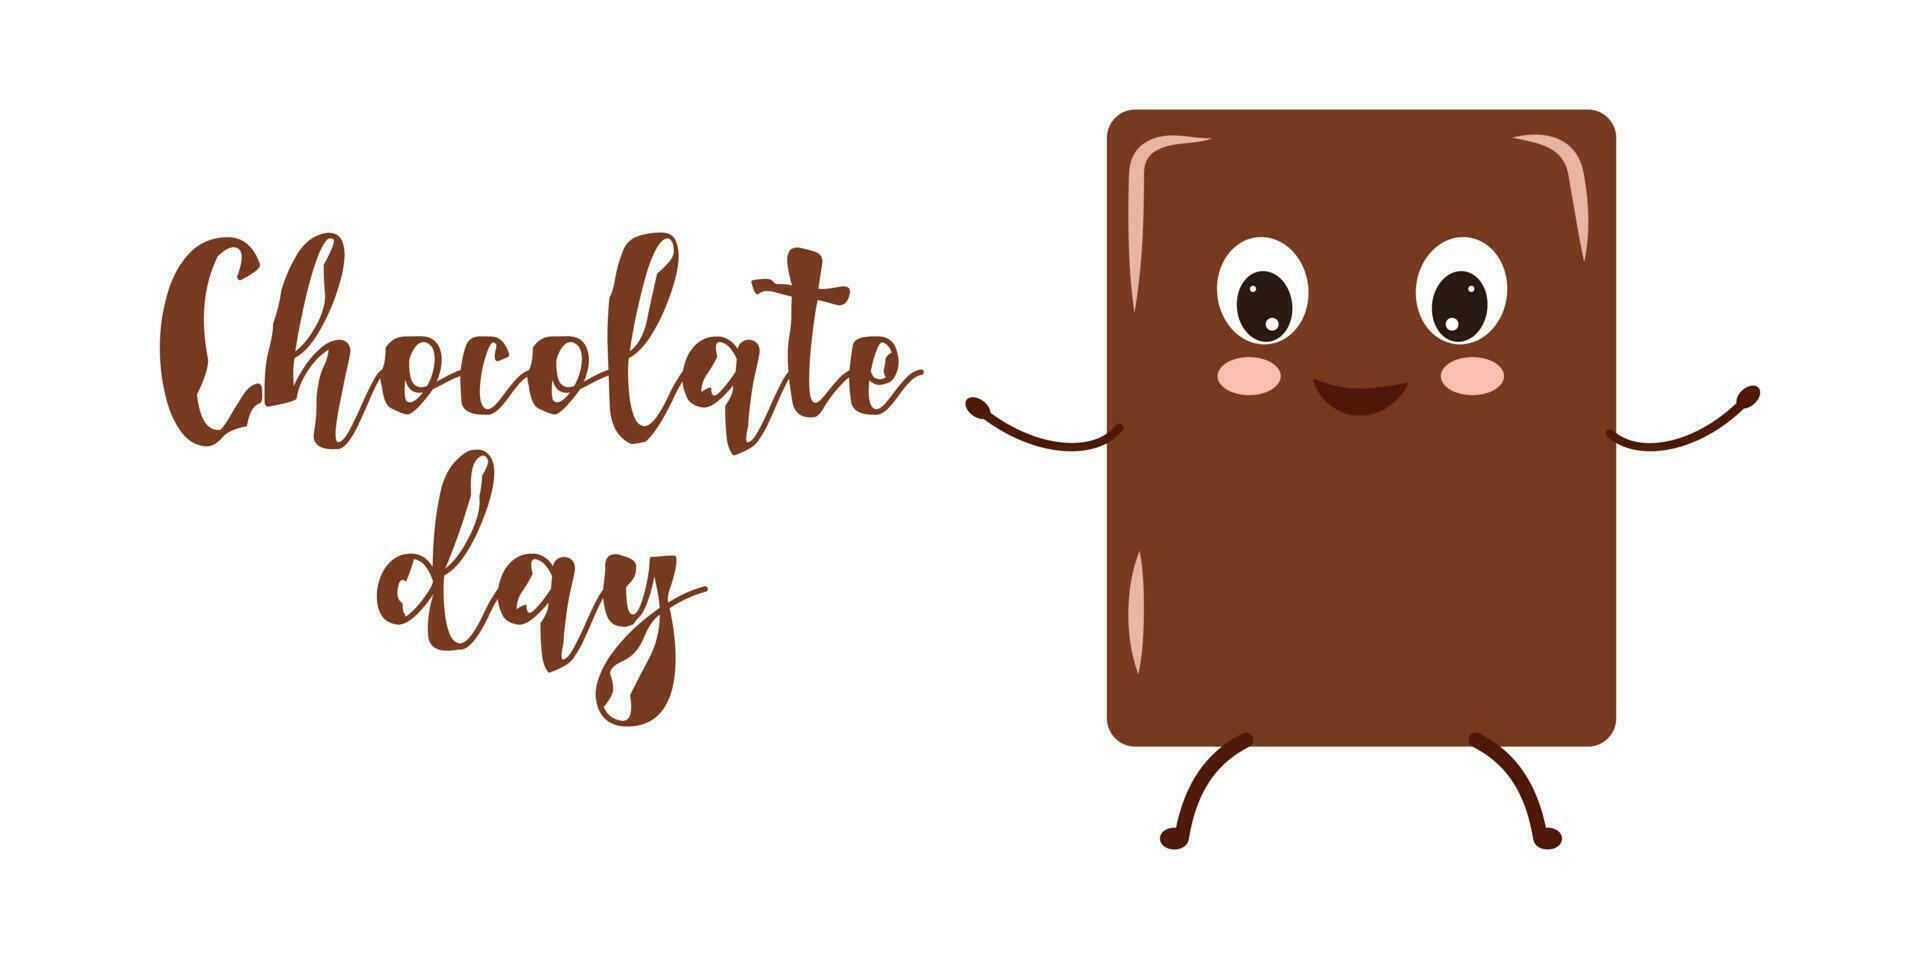 Chocolate Day.Chocolate character design with text vector